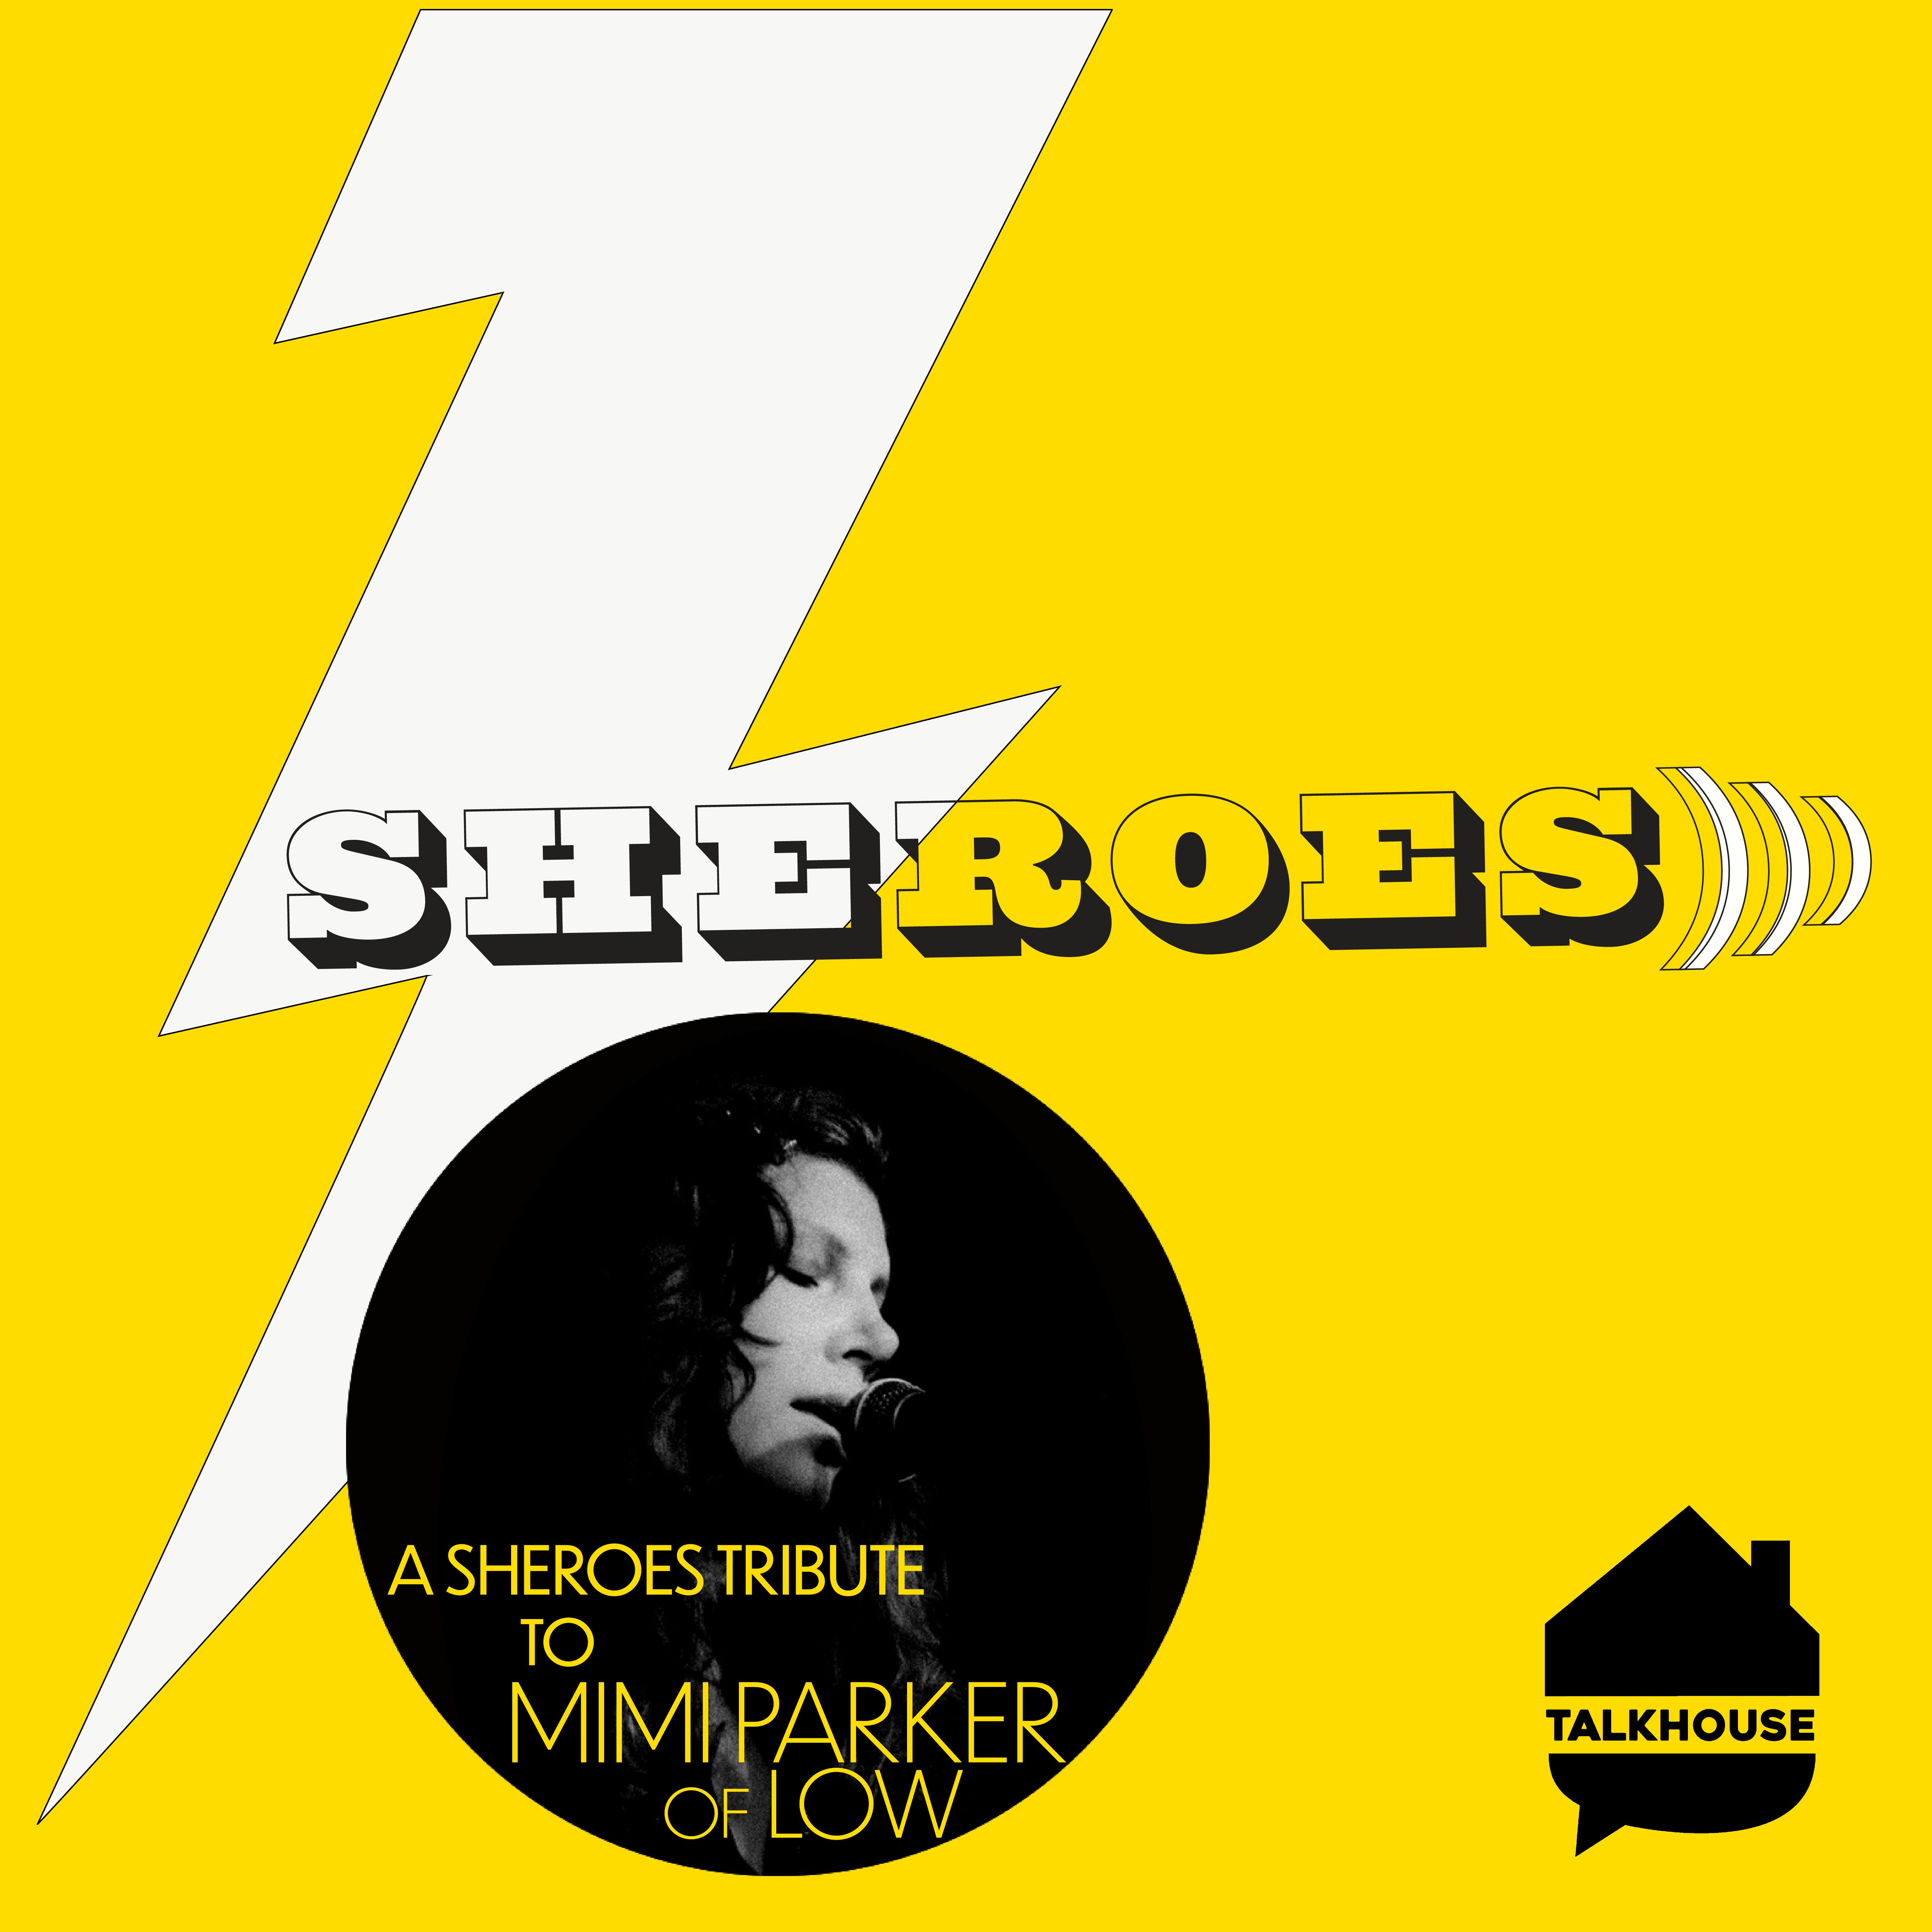 A SHEROES Tribute to Mimi Parker of Low